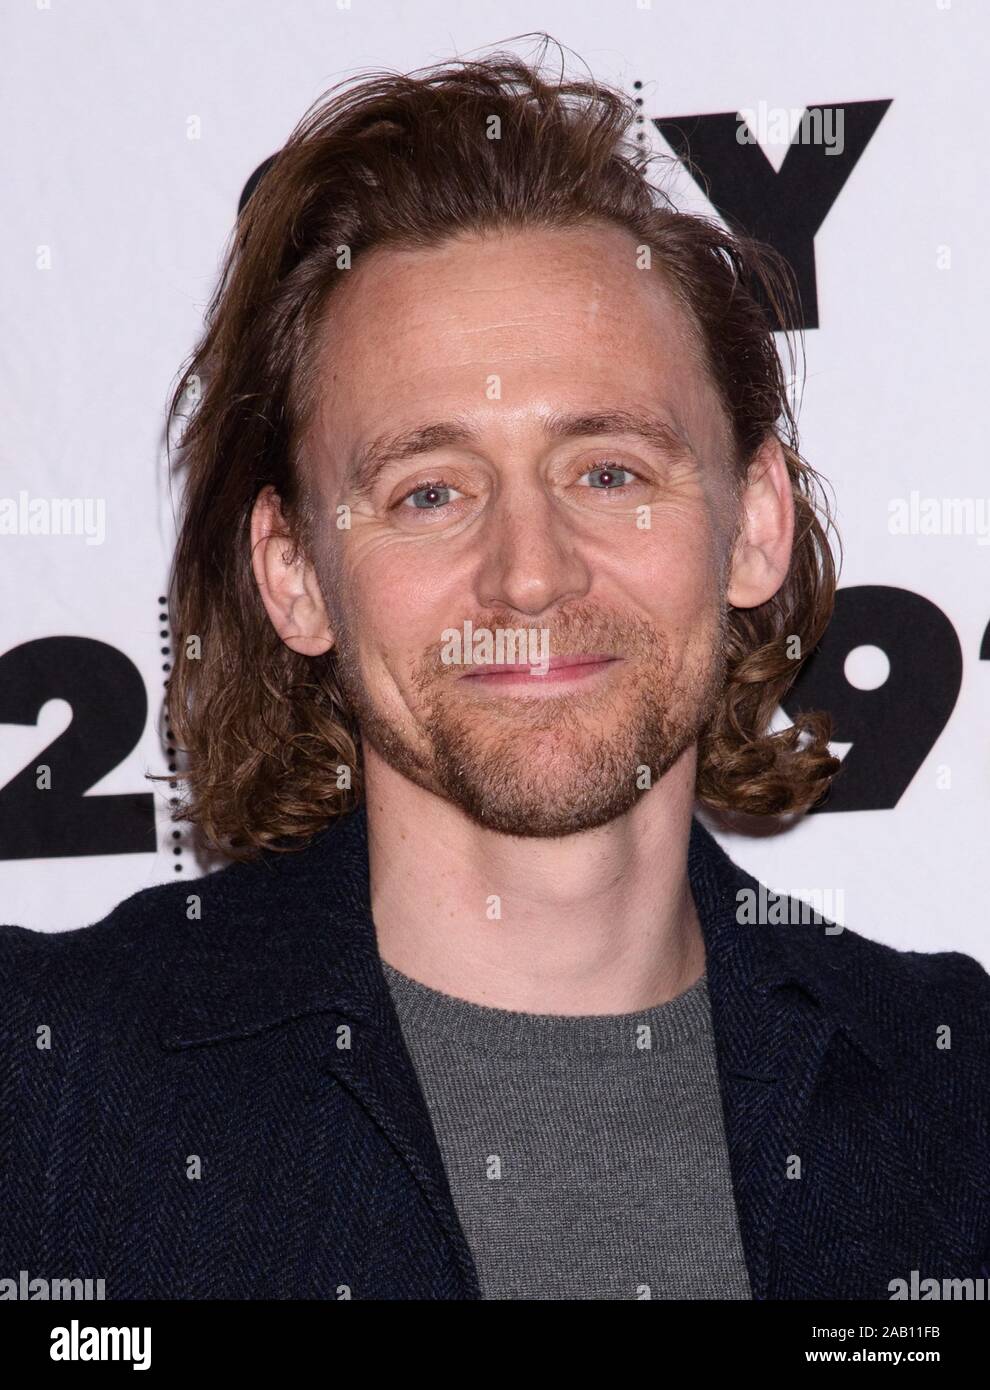 New York, NY, USA. 23rd Nov, 2019. Tom Hiddleston at arrivals for BETRAYAL:  A Conversation with the Broadway Cast, 92nd Street Y, New York, NY November  23, 2019. Credit: RCF/Everett Collection/Alamy Live